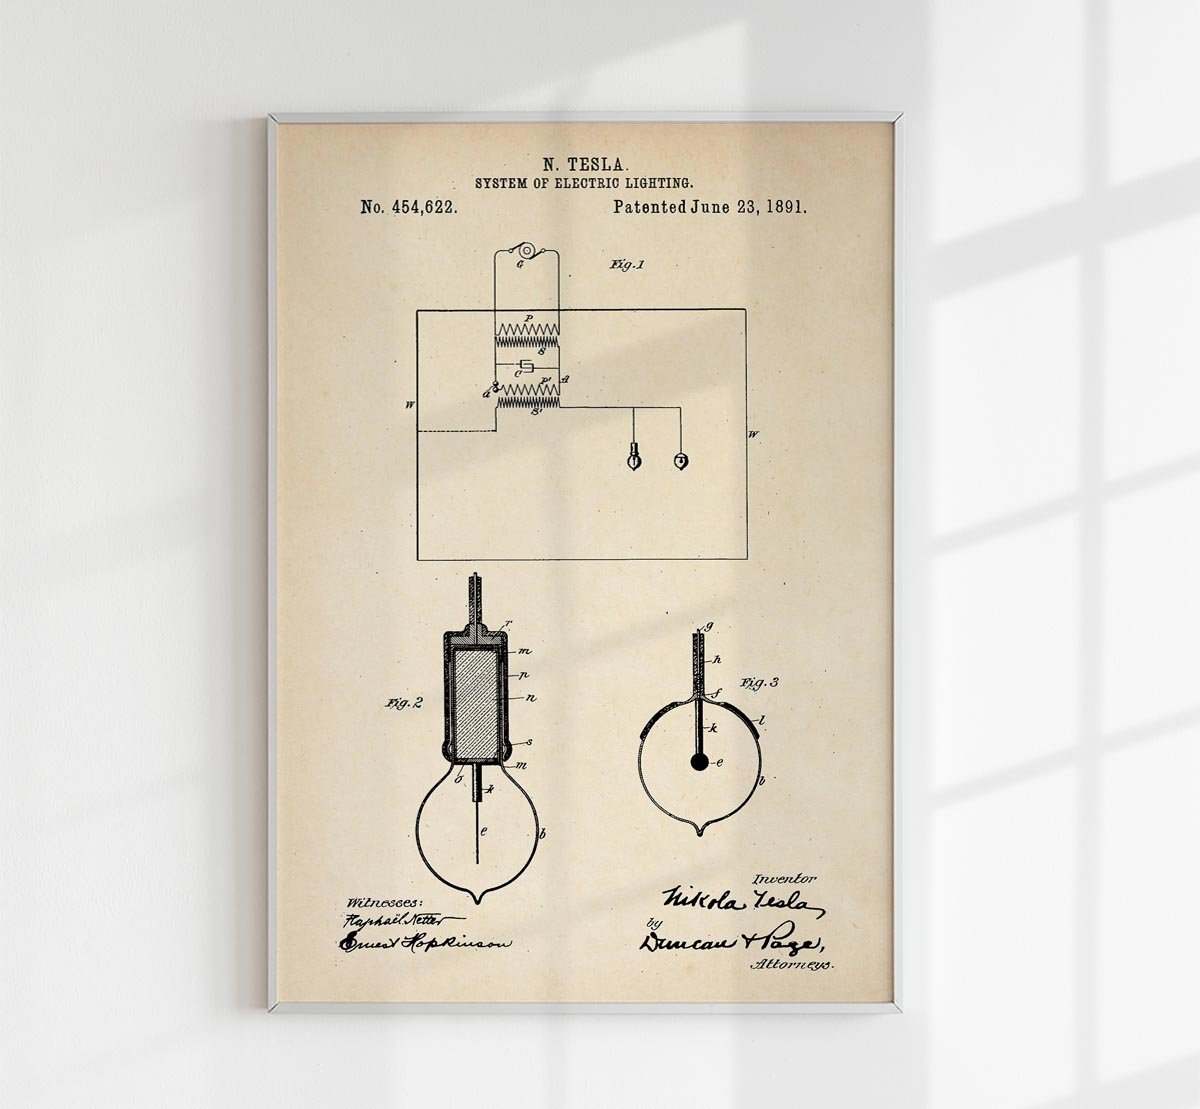 Tesla's System of Electric Lighting Patent Poster